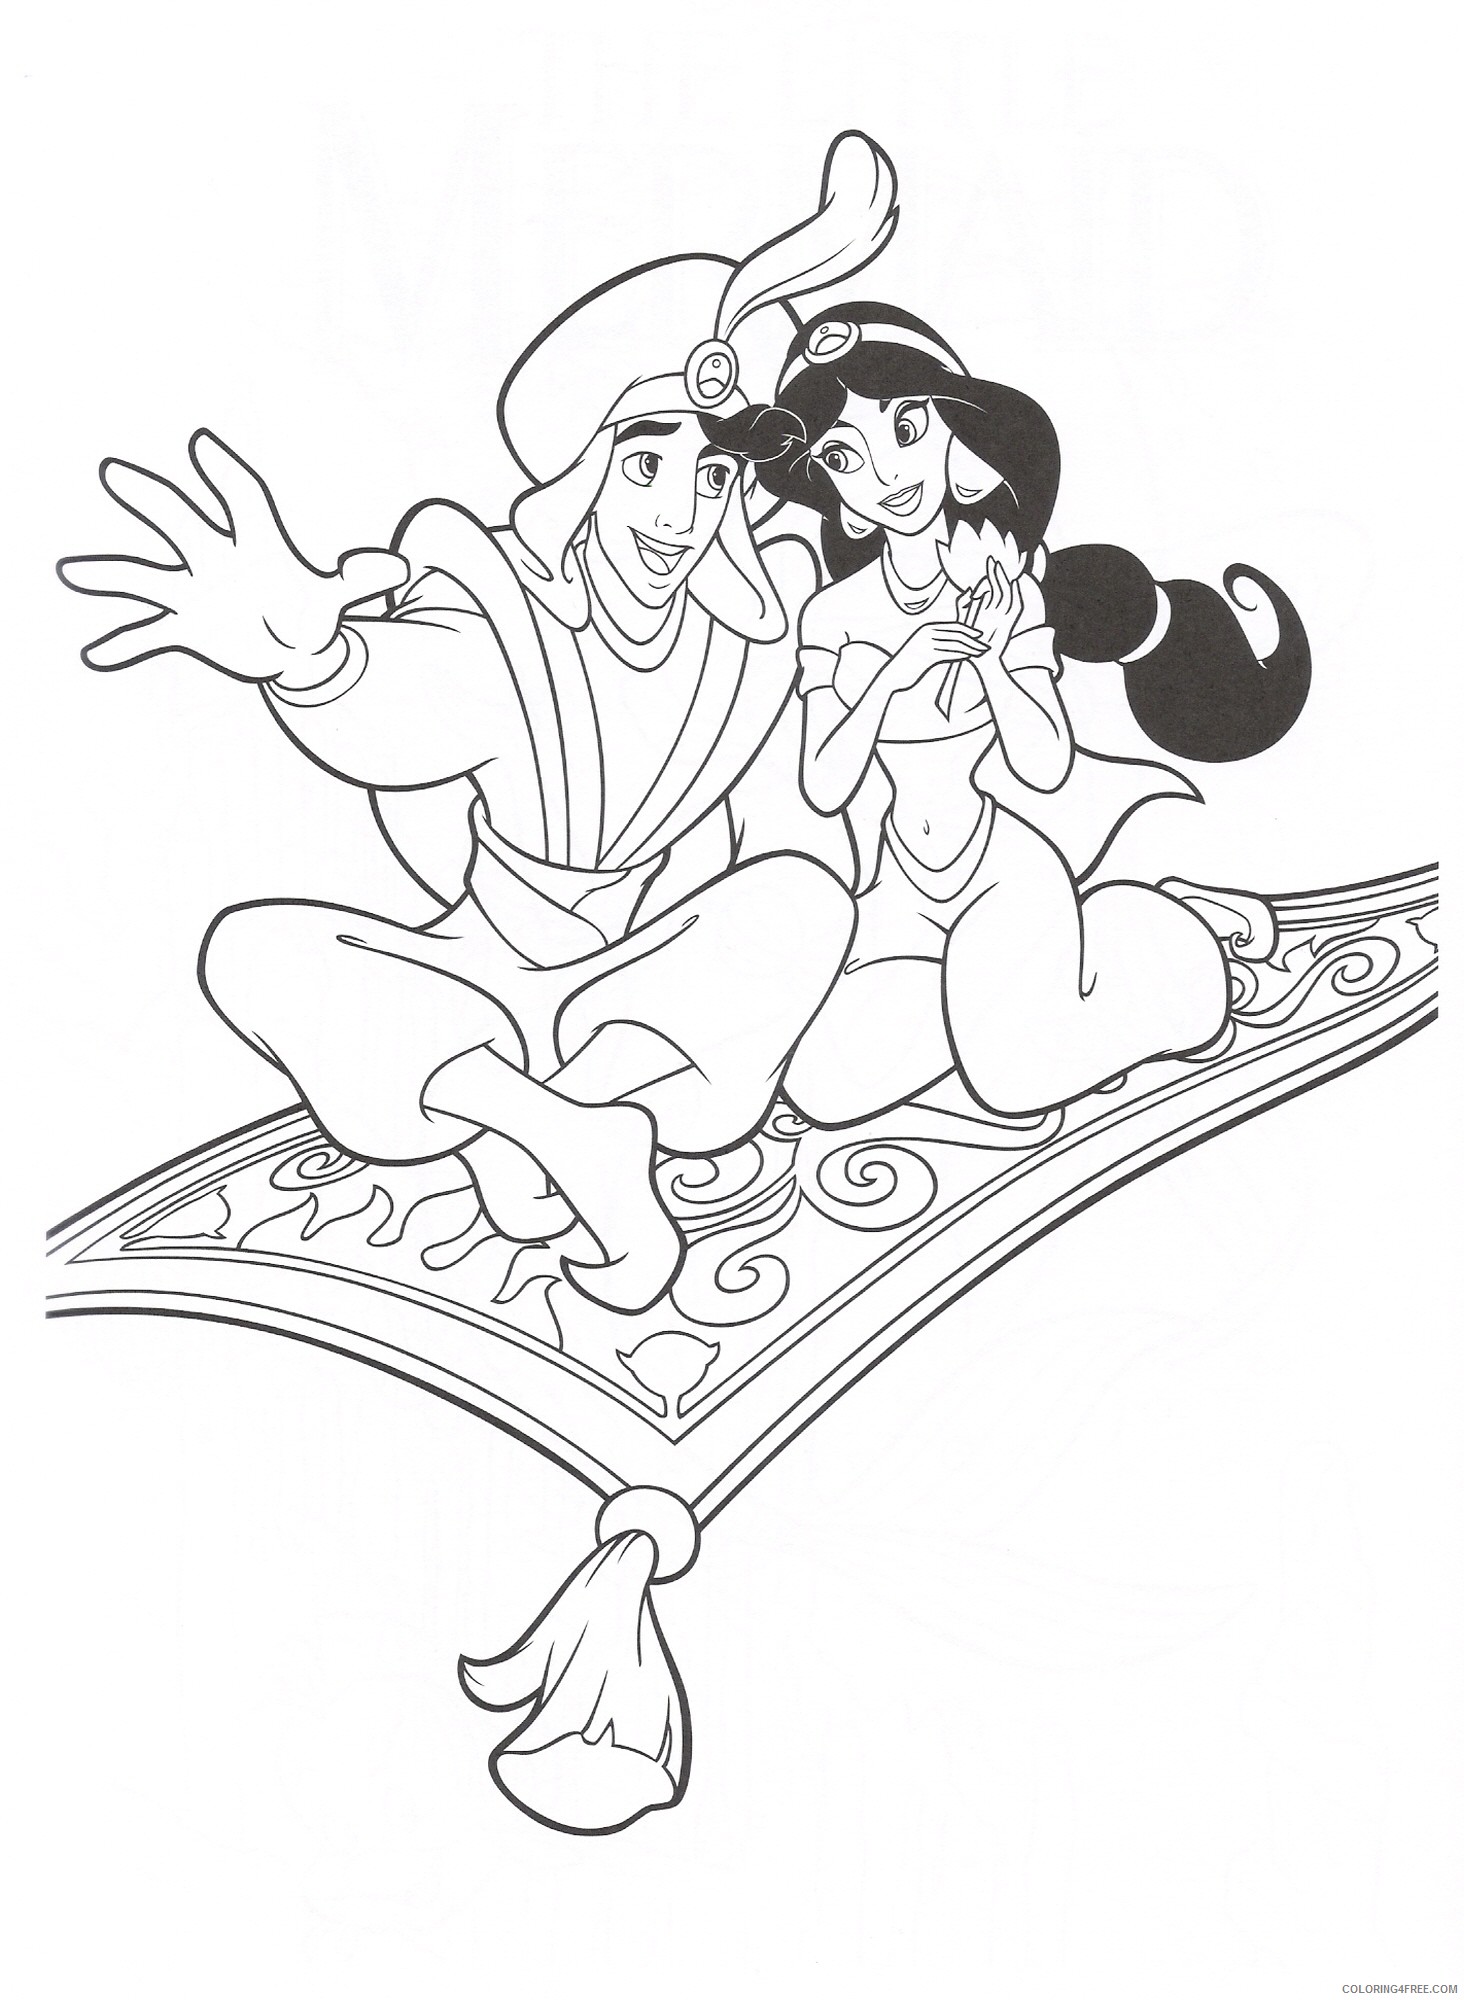 Aladdin Coloring Pages Cartoons Aladdin Pictures Printable 2020 0325 Coloring4free